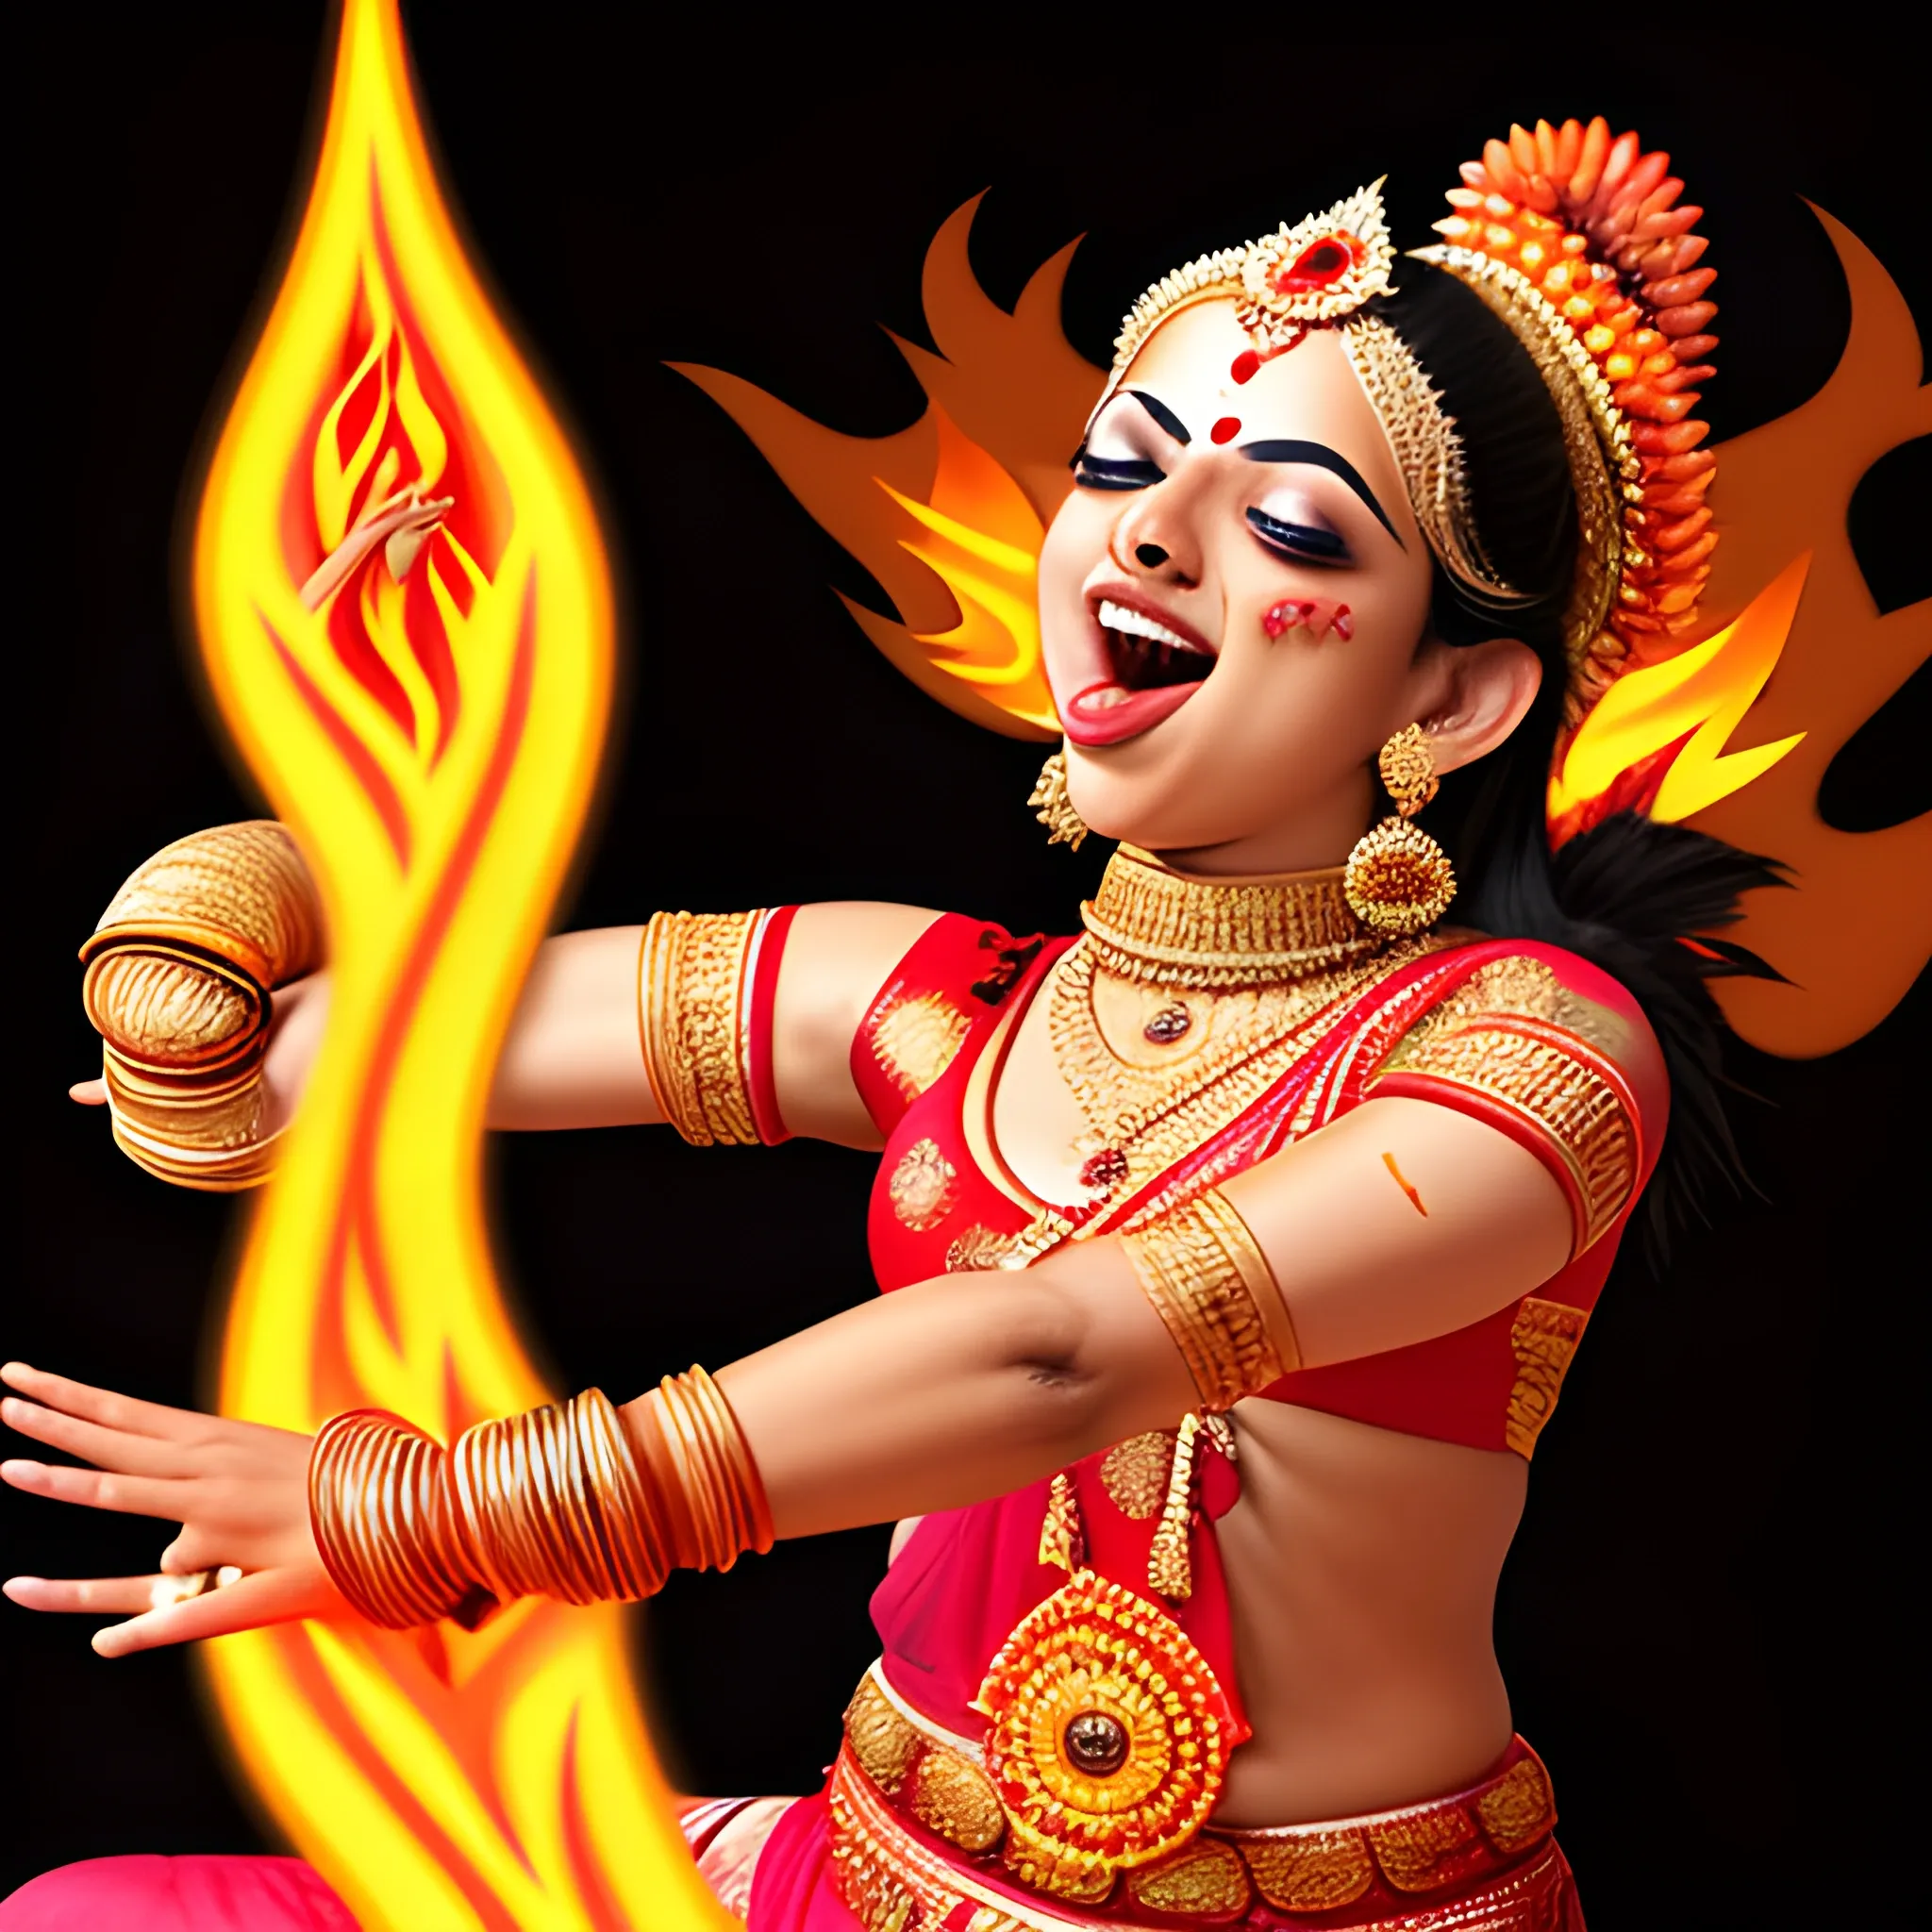 hindu dance sticking tongue out full of fire